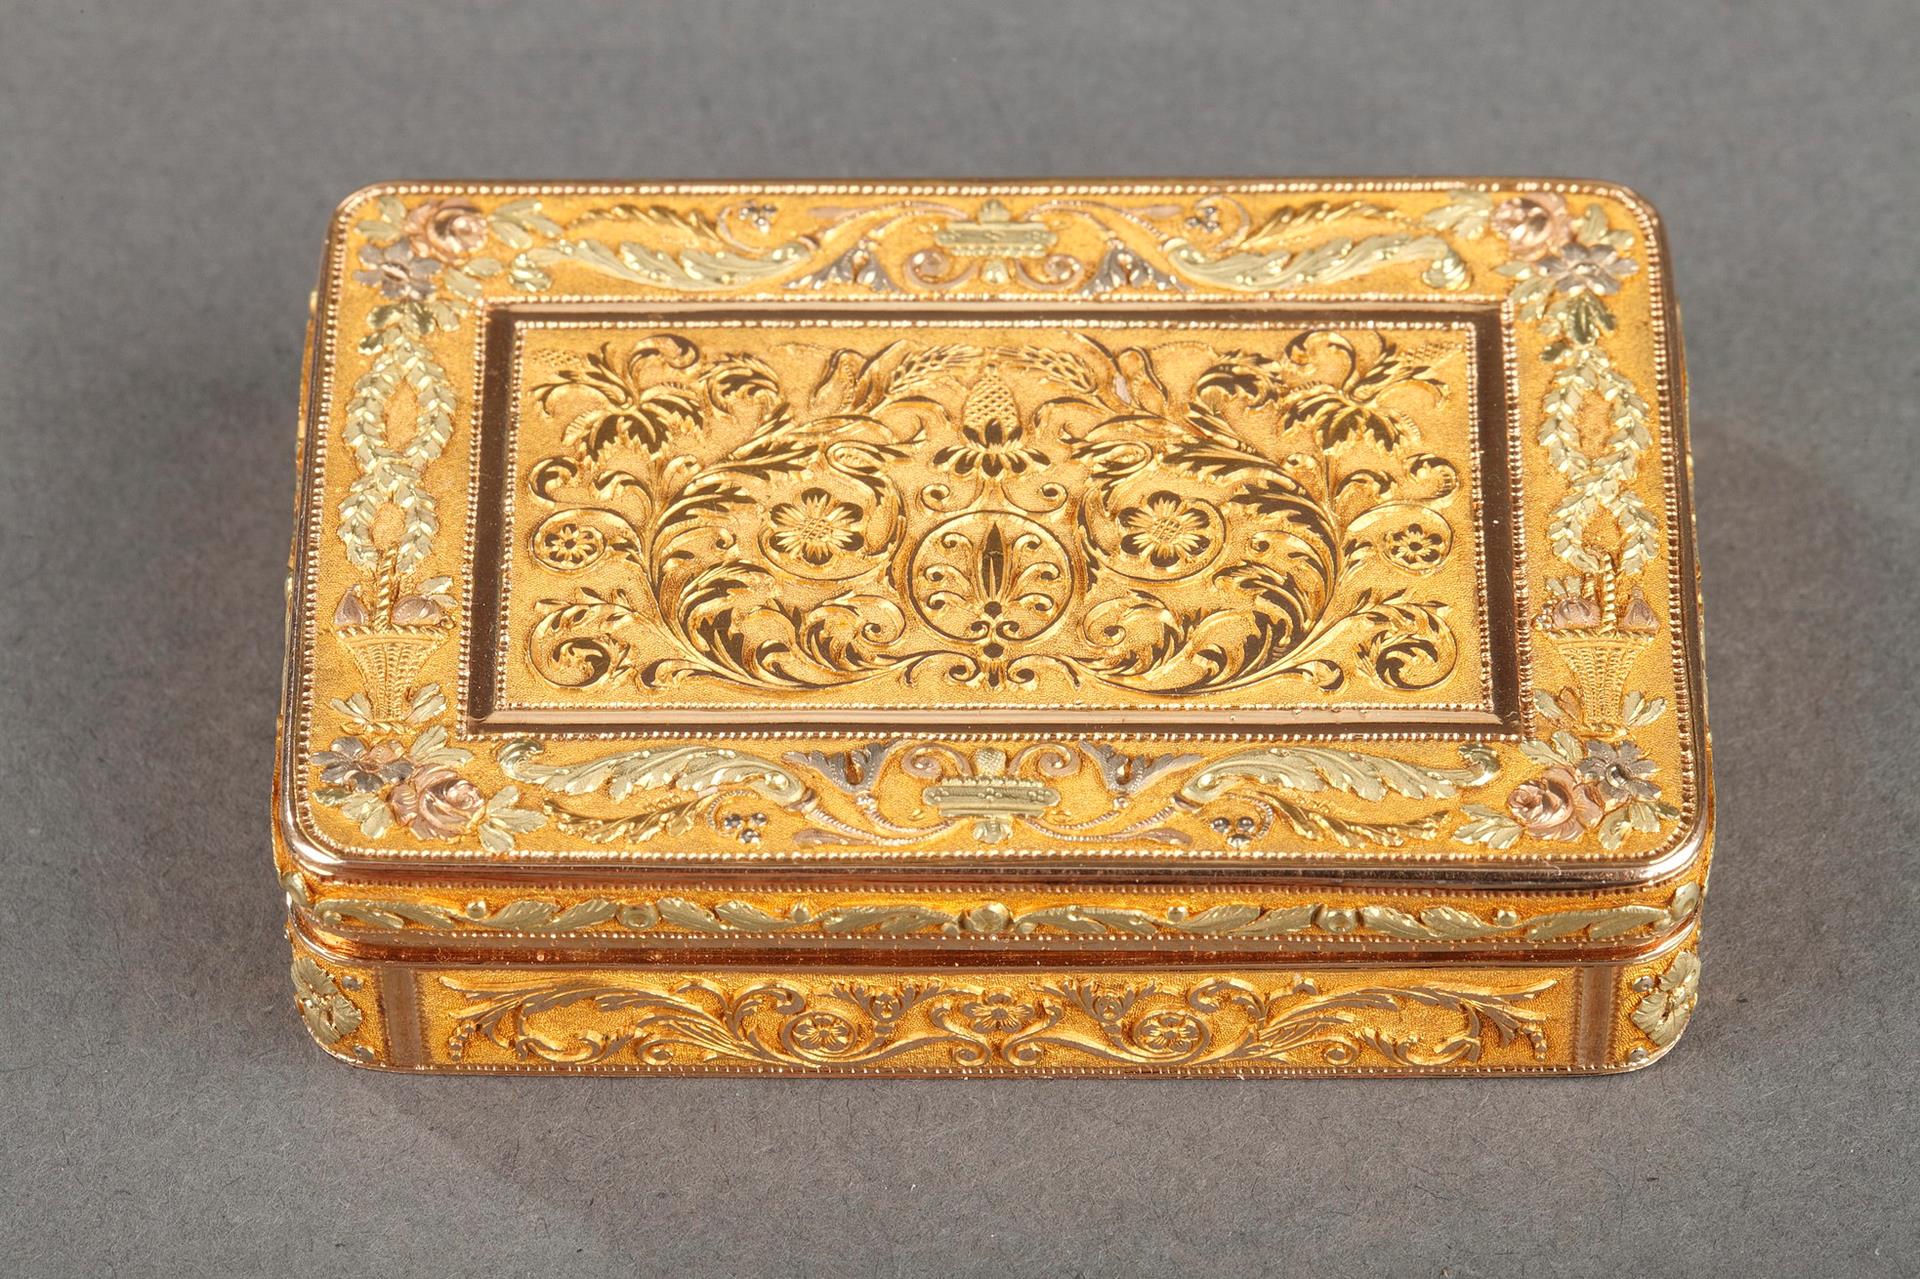 Gold box. Early 19th century. Restauration.